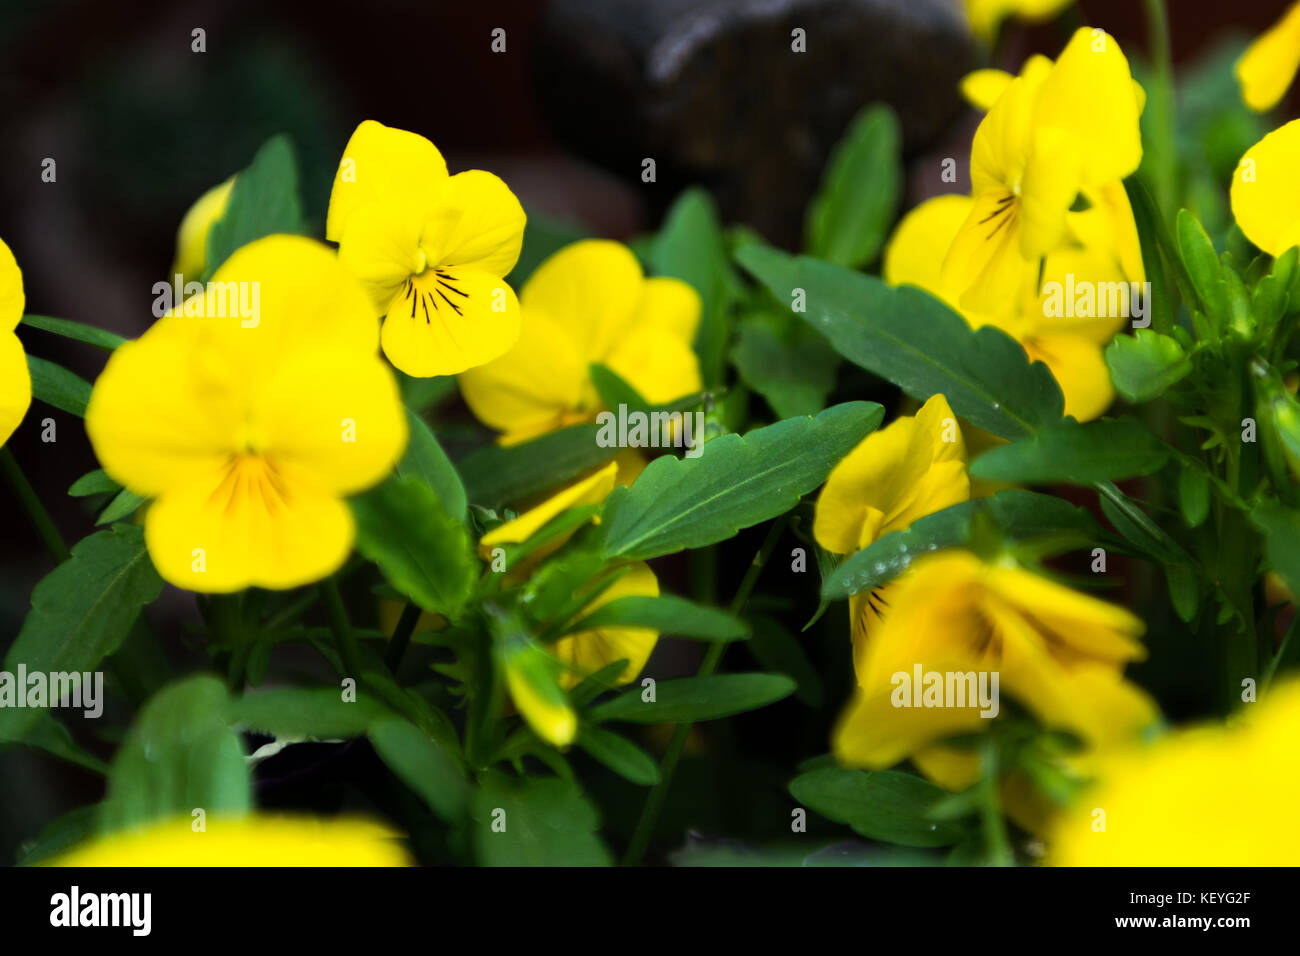 Pansy yellow with green leaves Stock Photo